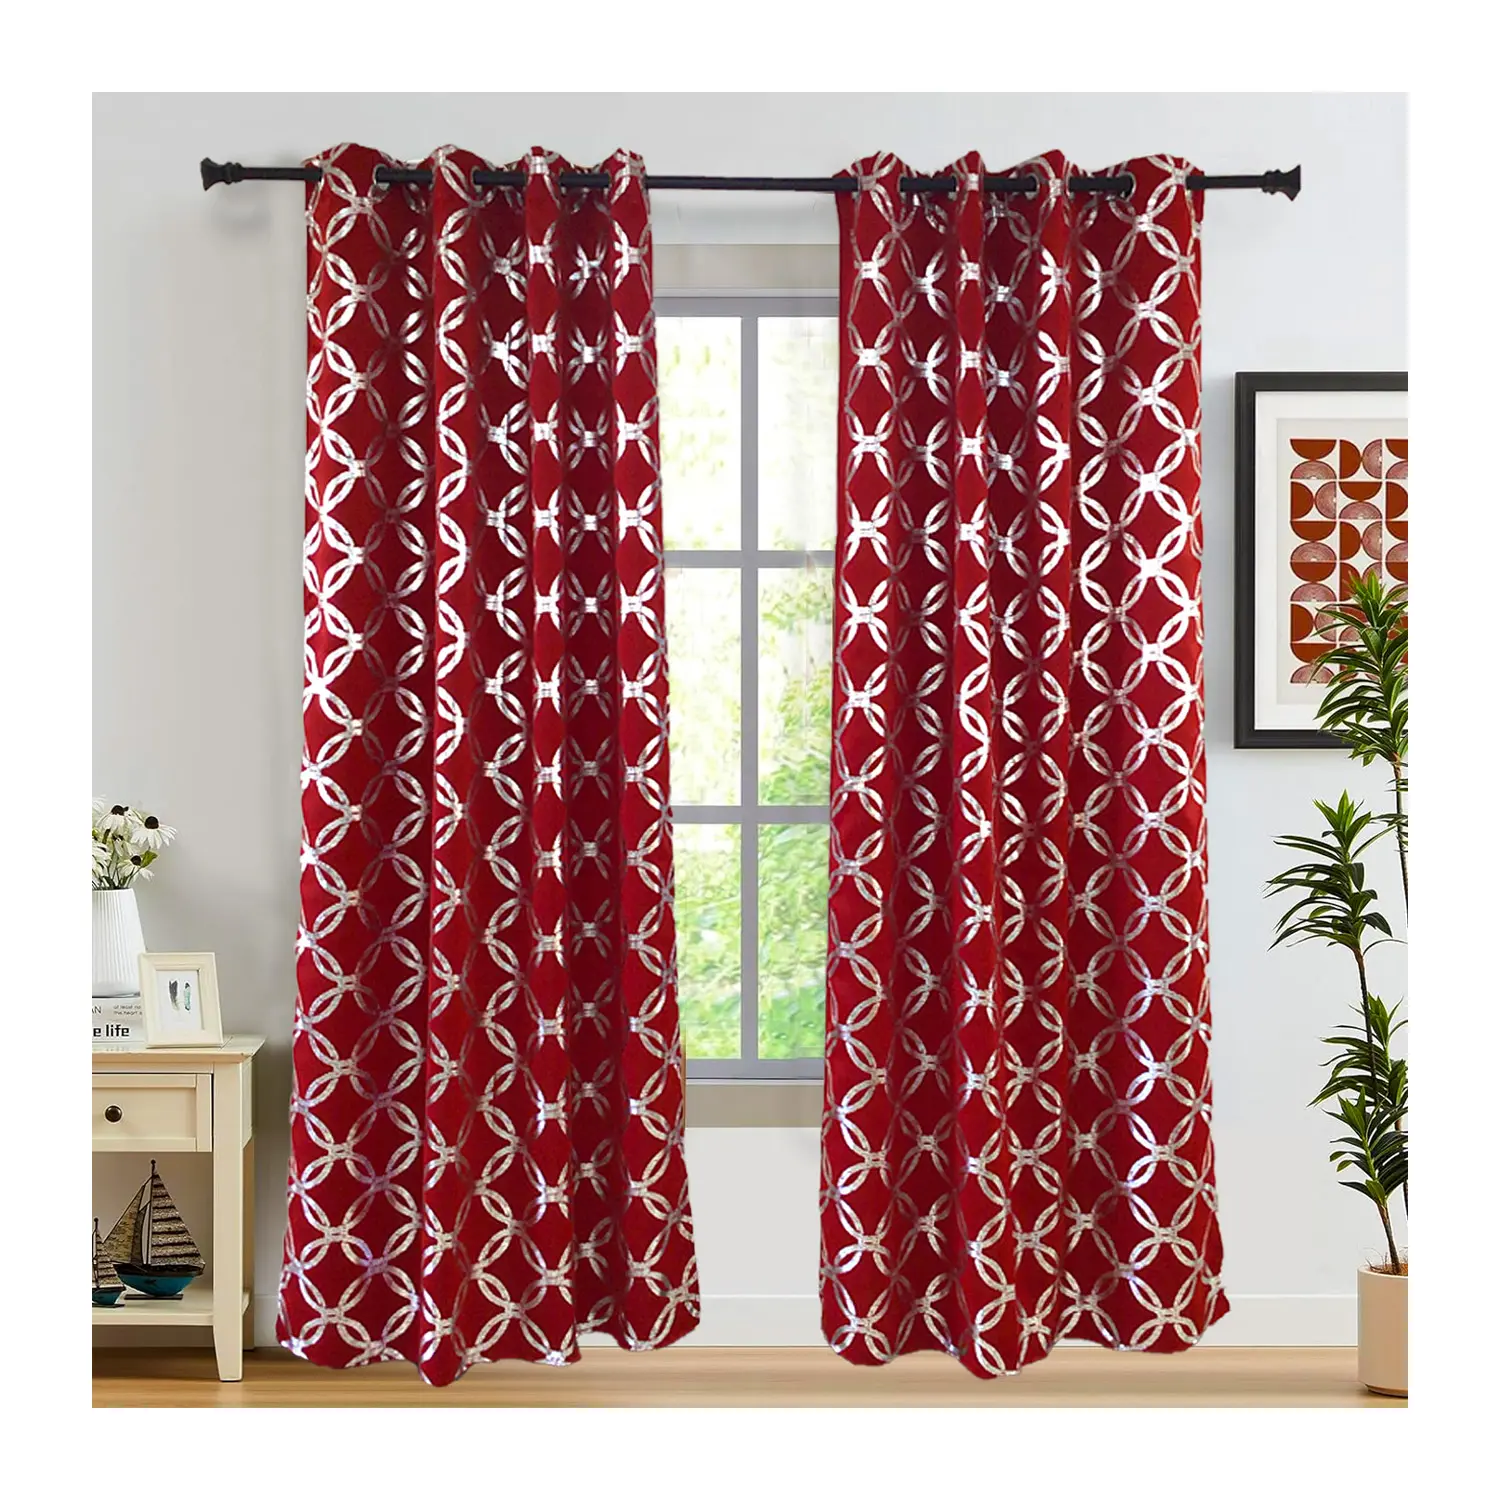 JA 52*96IN Moroccan Metallic Print Energy Efficient Thermal Insulated Curtains Red Blackout Silver Foil for Bedroom Living Room